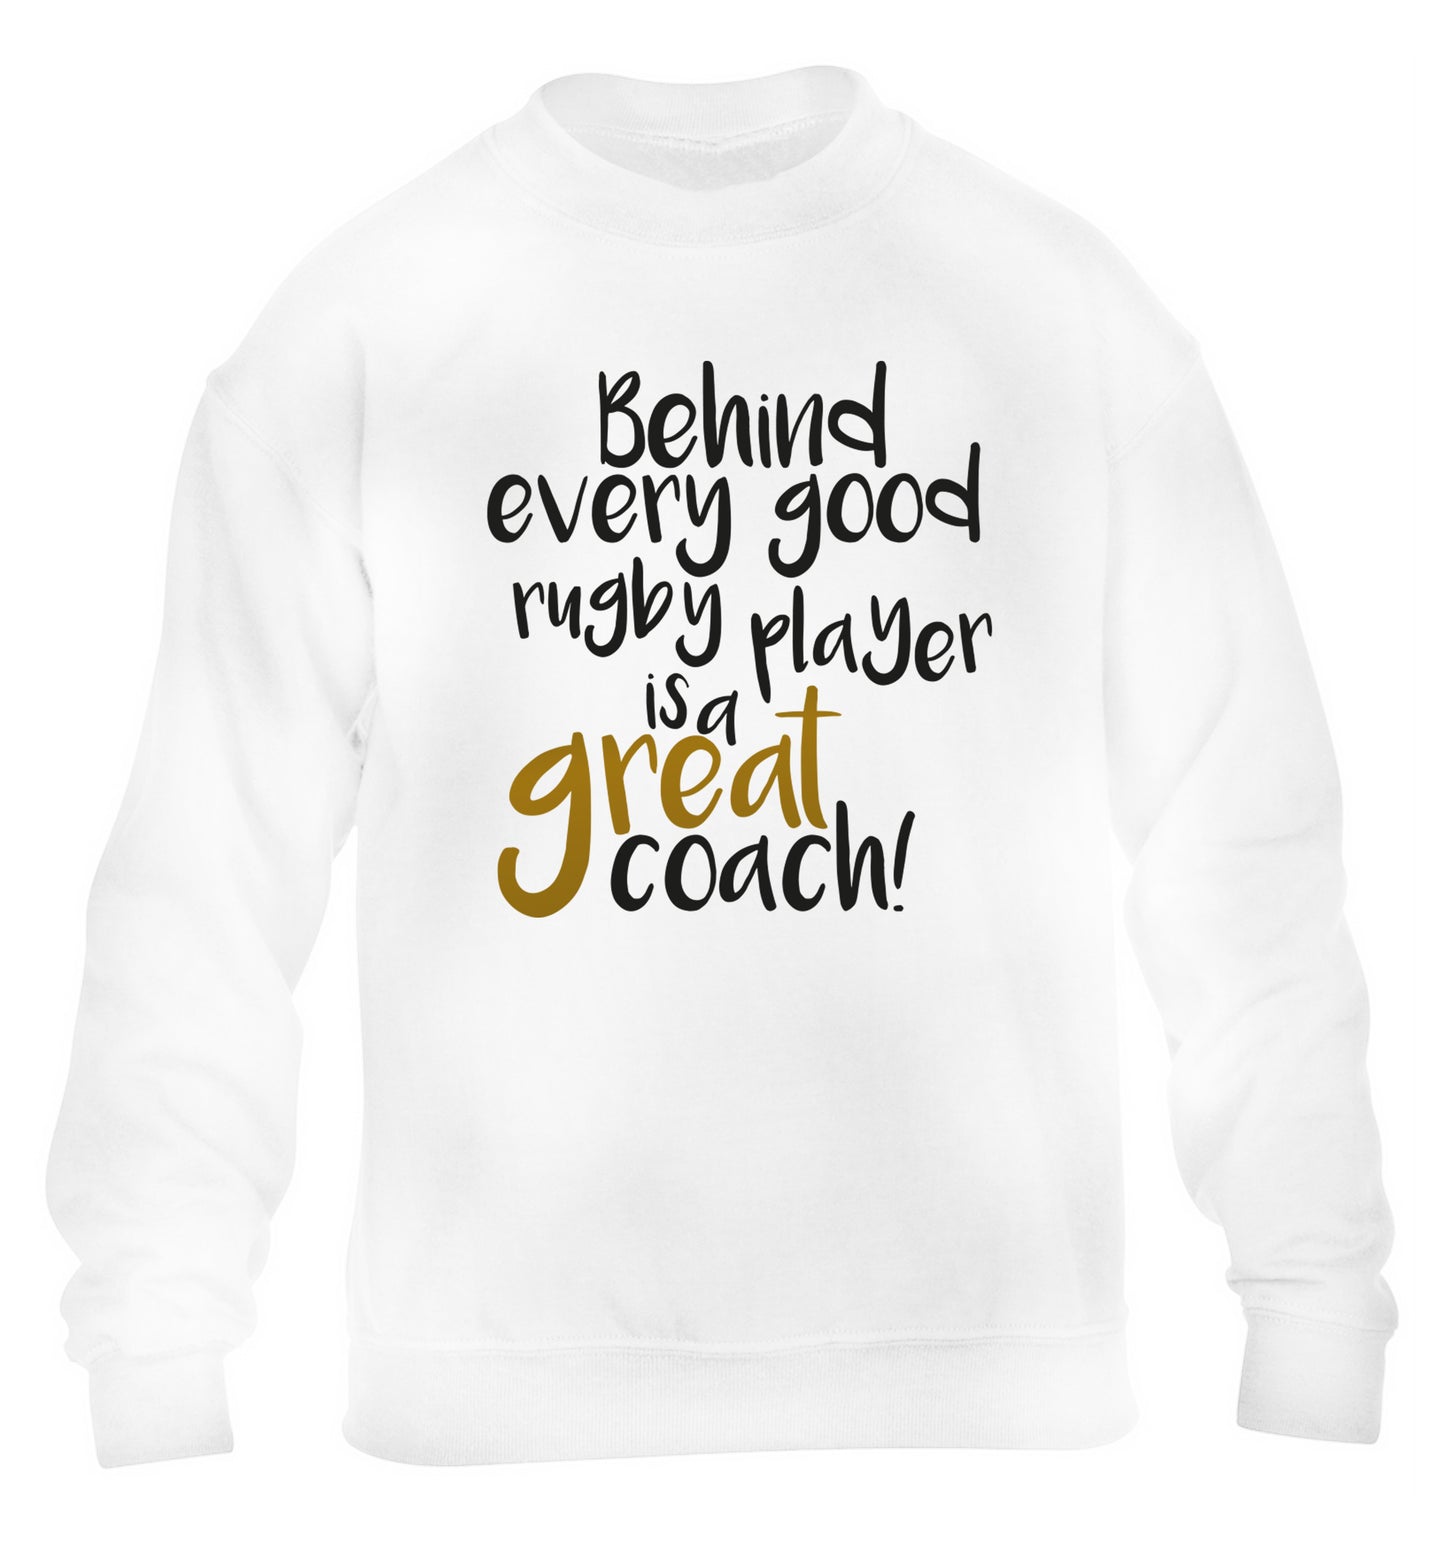 Behind every goor rugby player is a great coach children's white sweater 12-13 Years